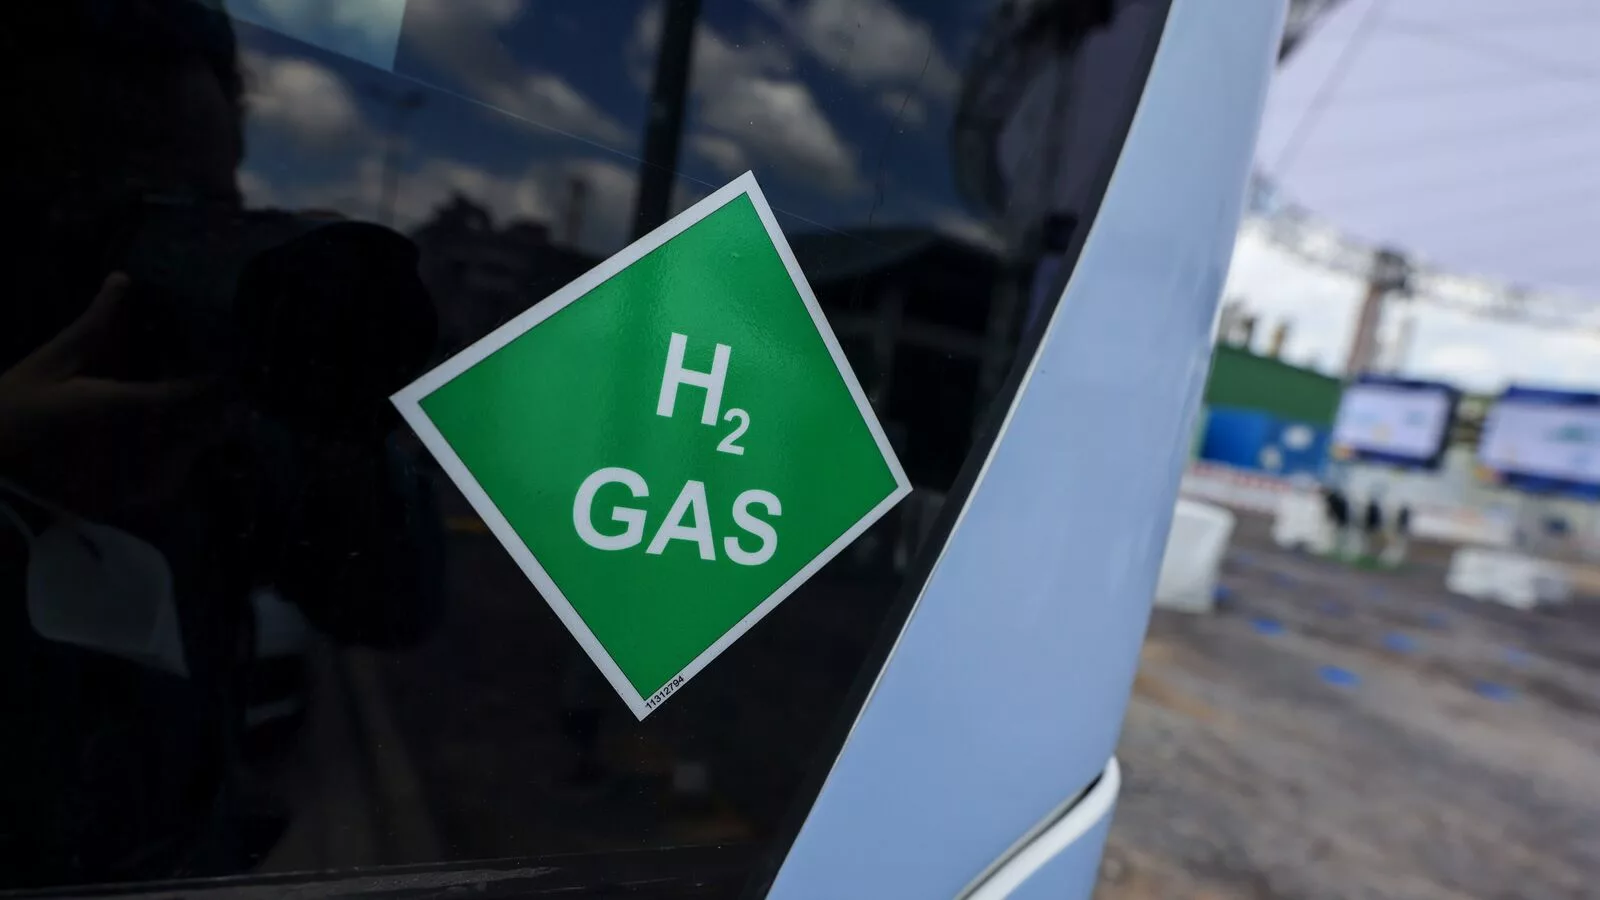 Centre plans to use hydrogen fuel in transport sector, issues guidelines